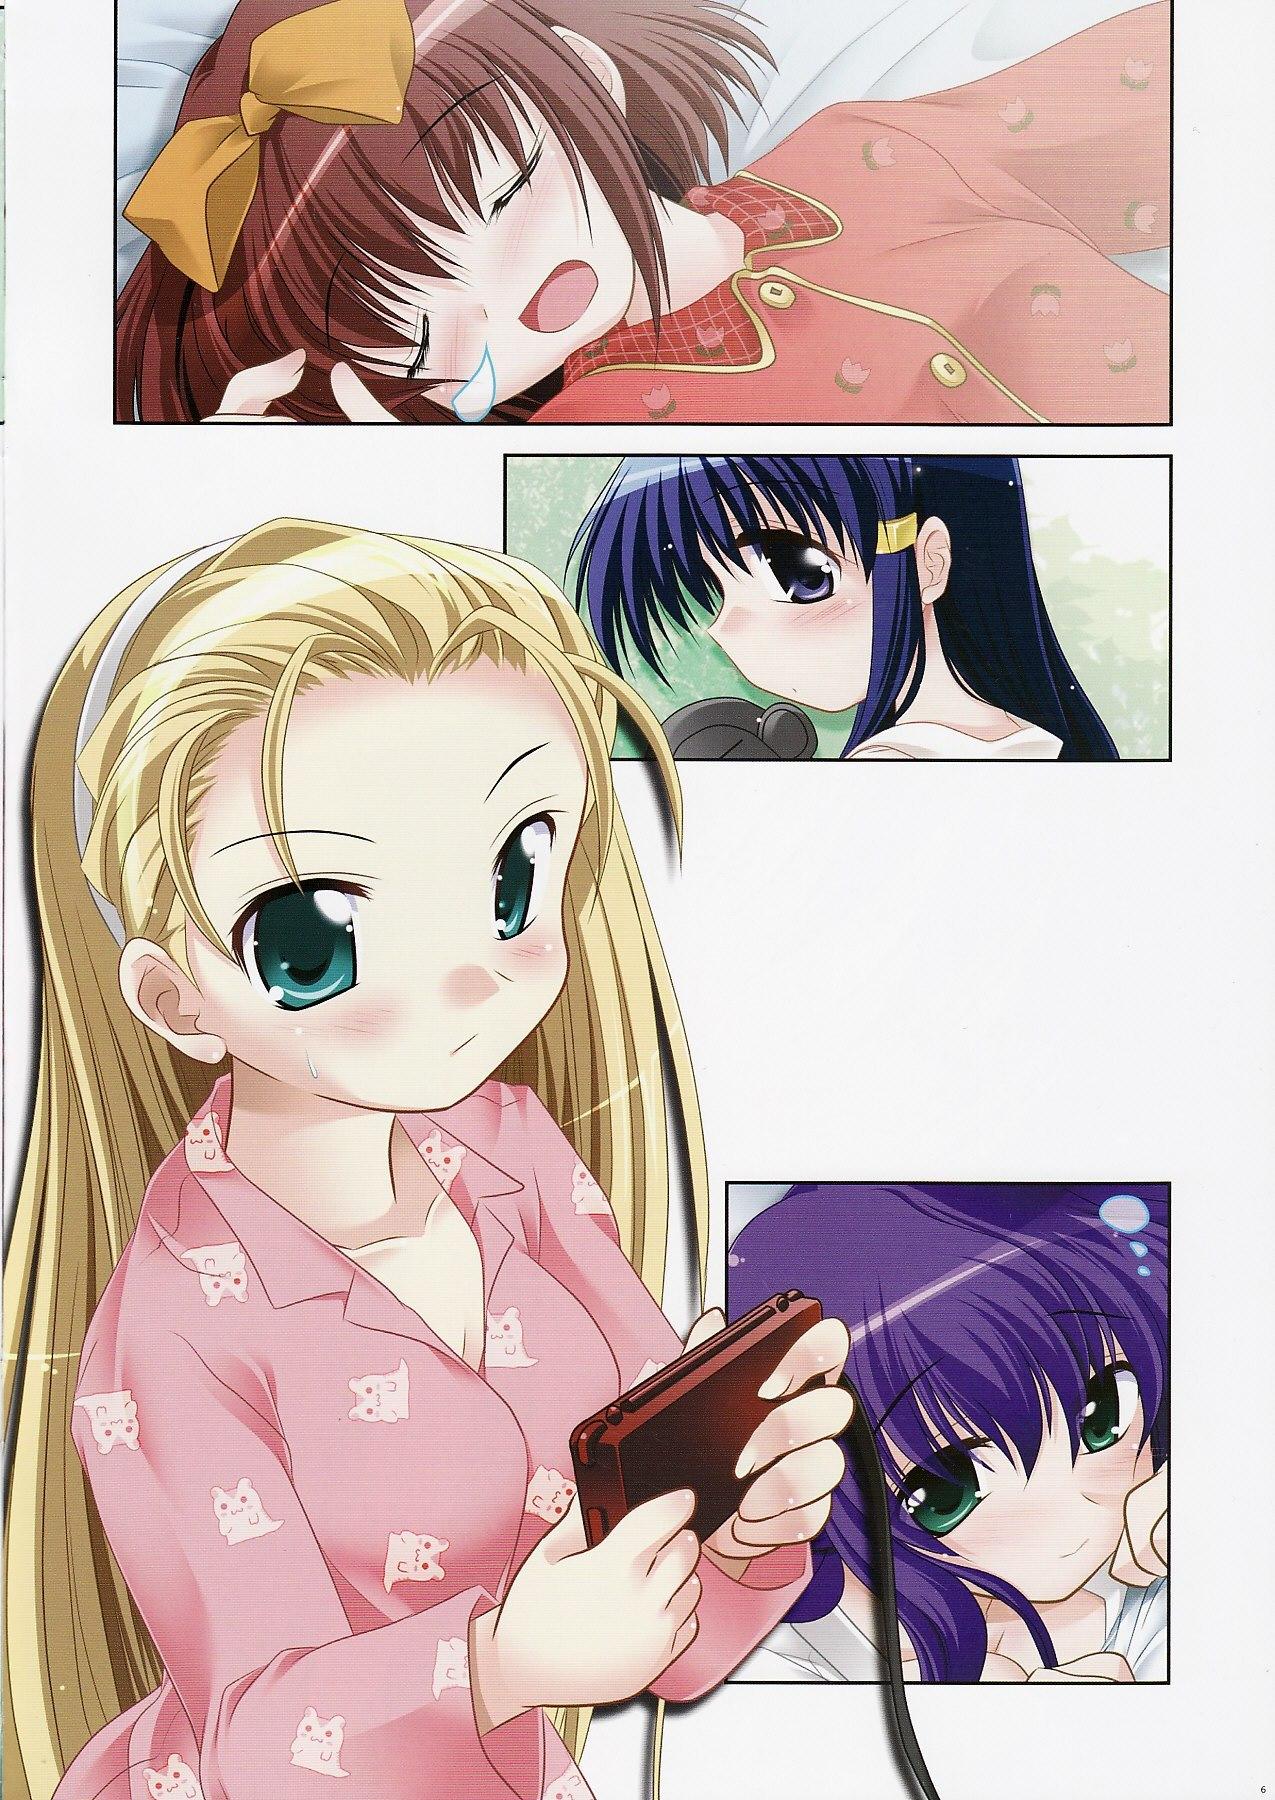 Mexicana Purimo#4 - Kanon Clannad Little busters Doggystyle - Page 7